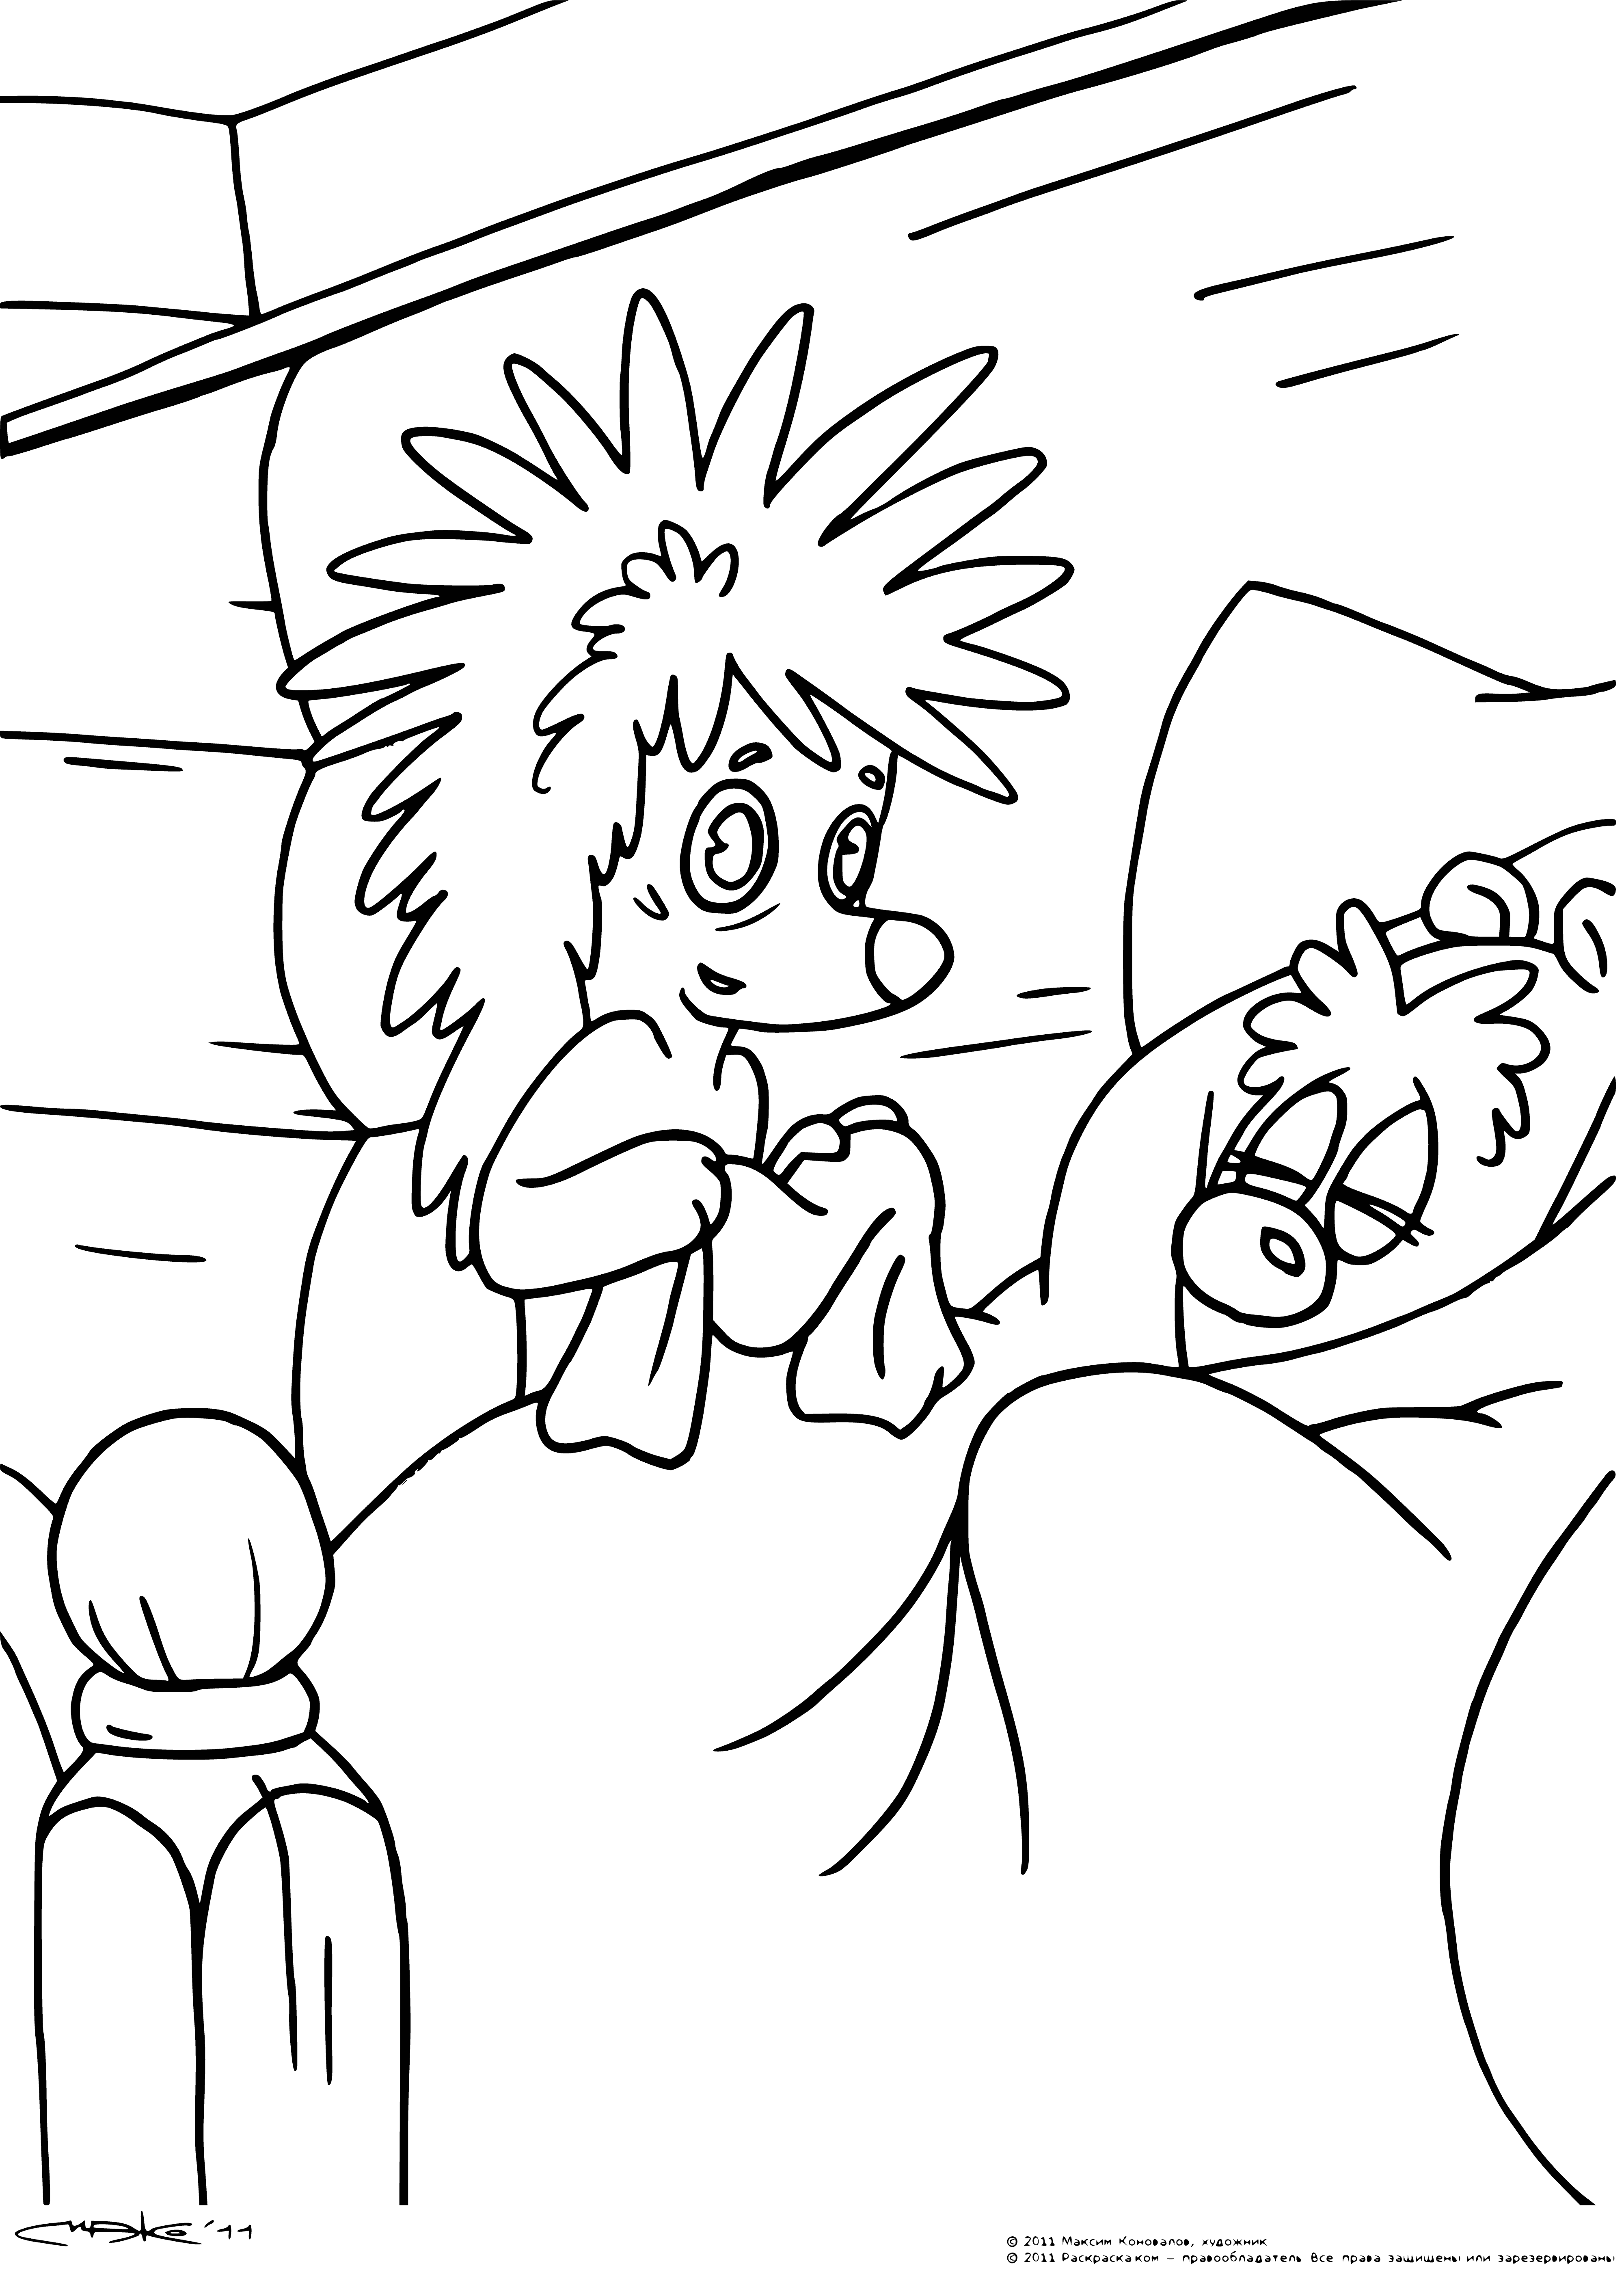 coloring page: A sick teddy bear in bed with thermometer, hedgehog on stool offering water & tissues.